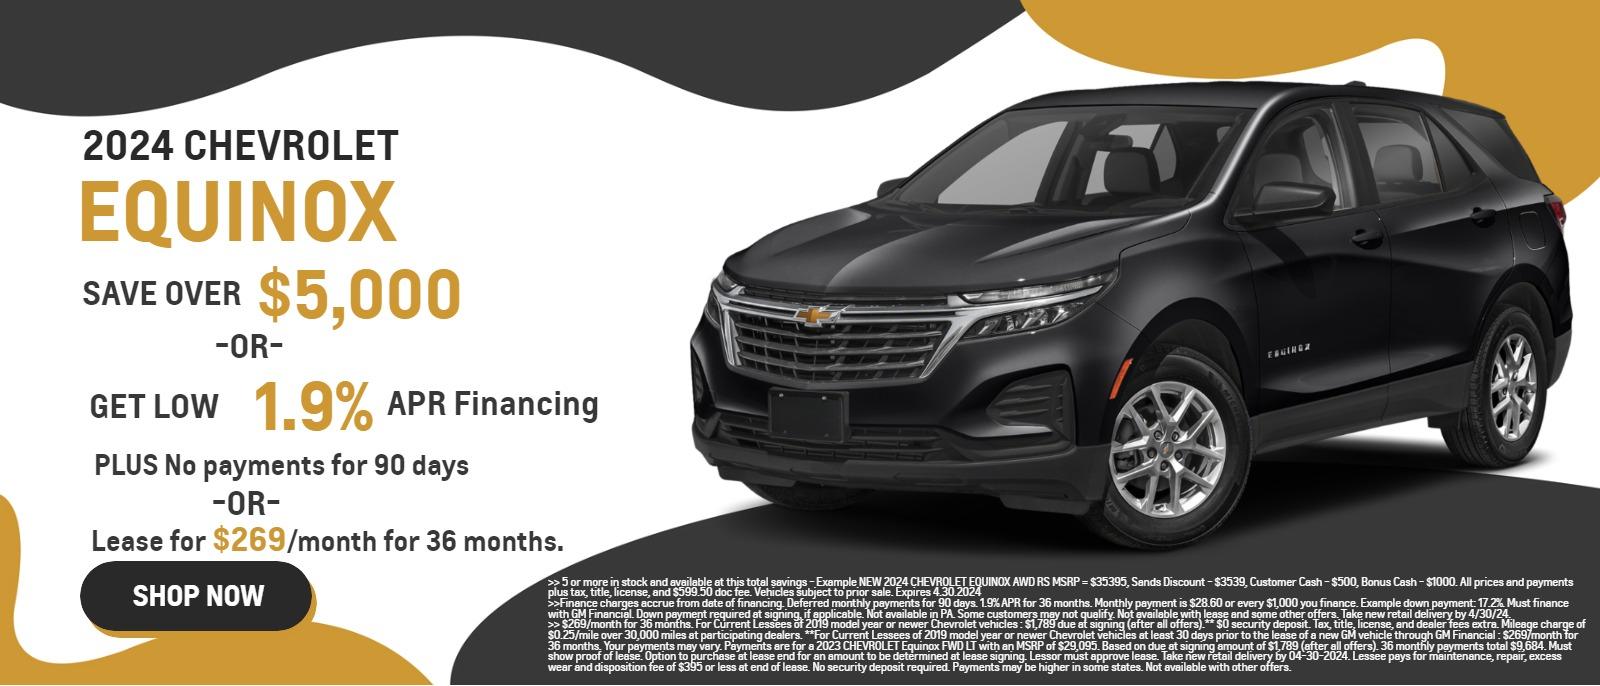 2024 CHEVROLET EQUINOX = SAVE OVER $5,000 OFF MSRP <<OR>> get 1.9% APR Financing PLUS No payments for 90 days <<OR>> Lease for $269/month for 36 months.